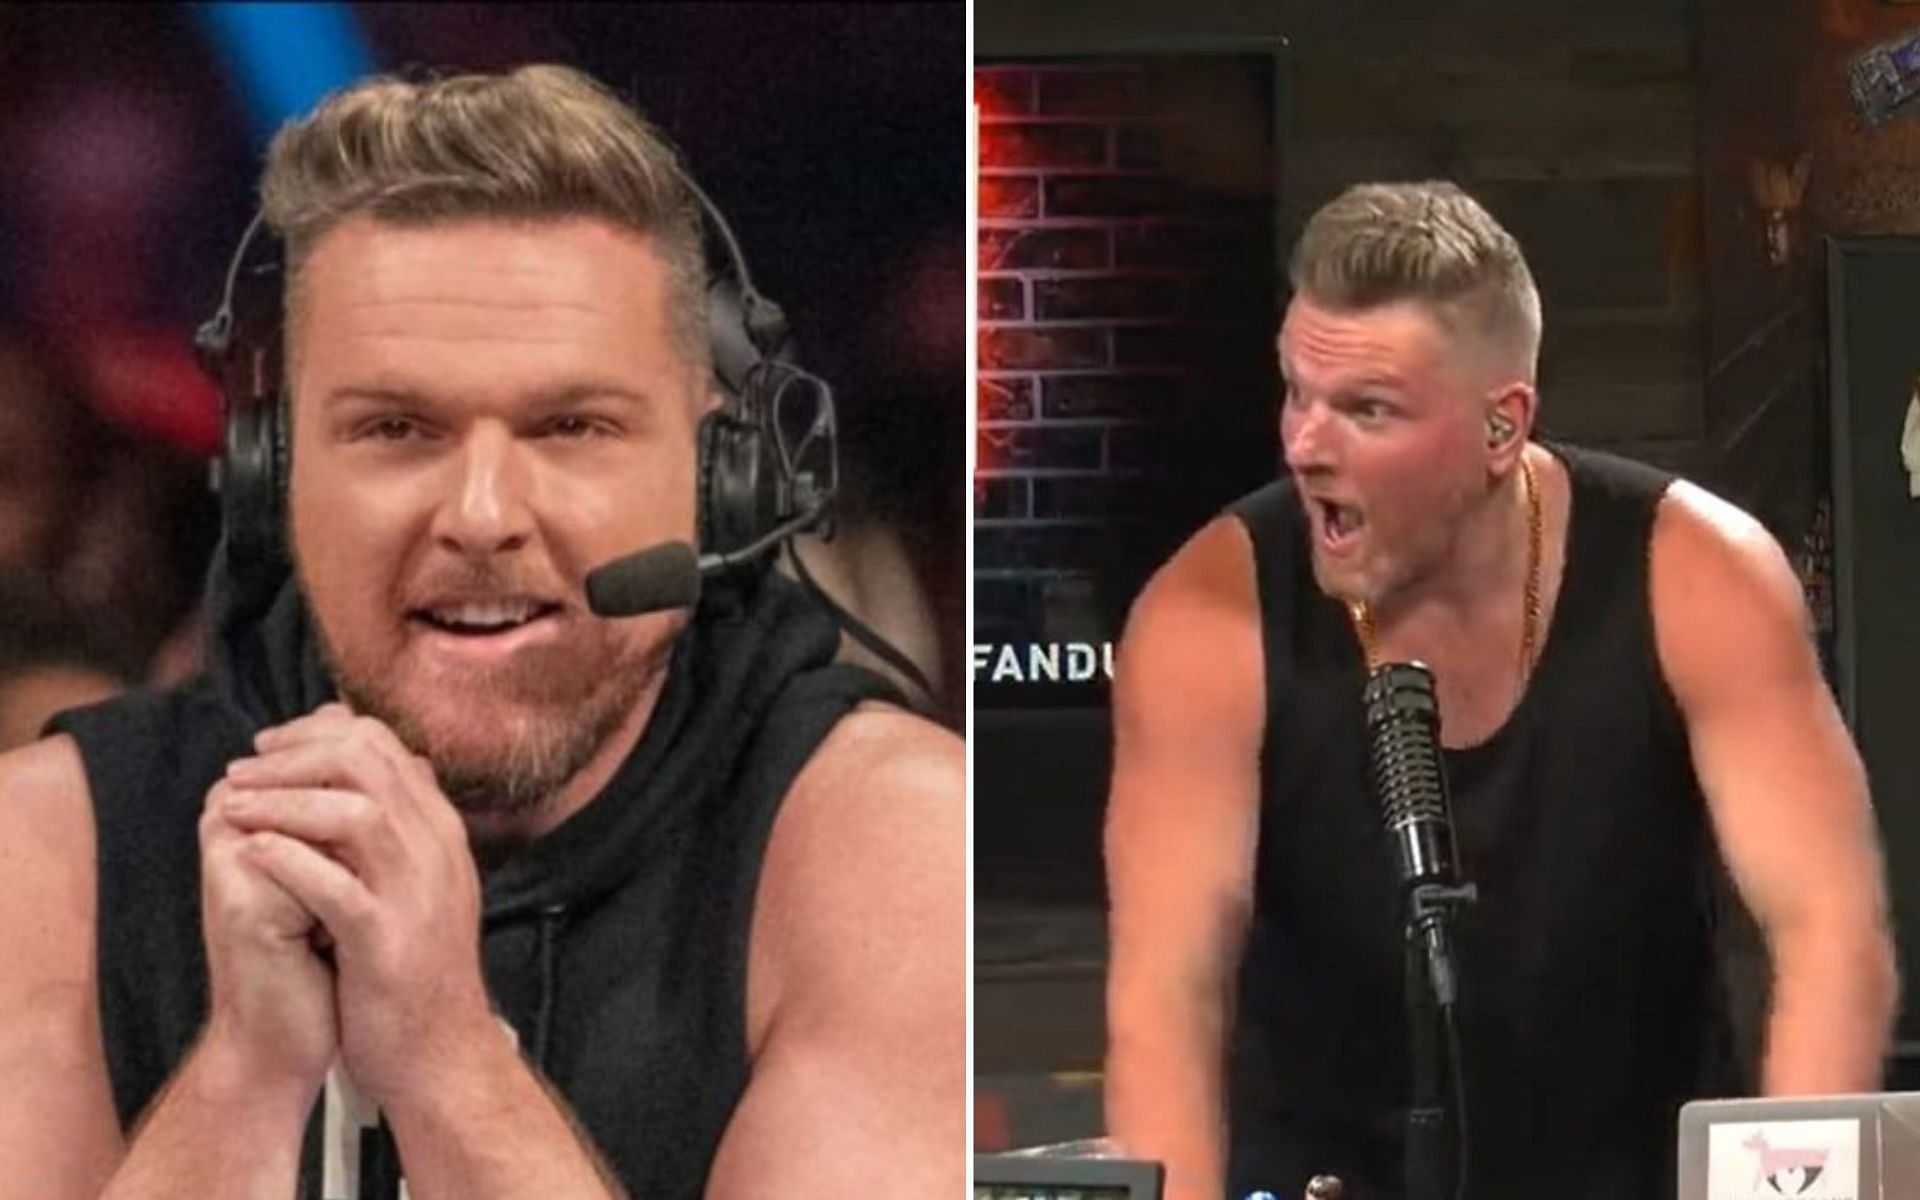 Pat McAfee and Michael Cole are commentators for SmackDown!